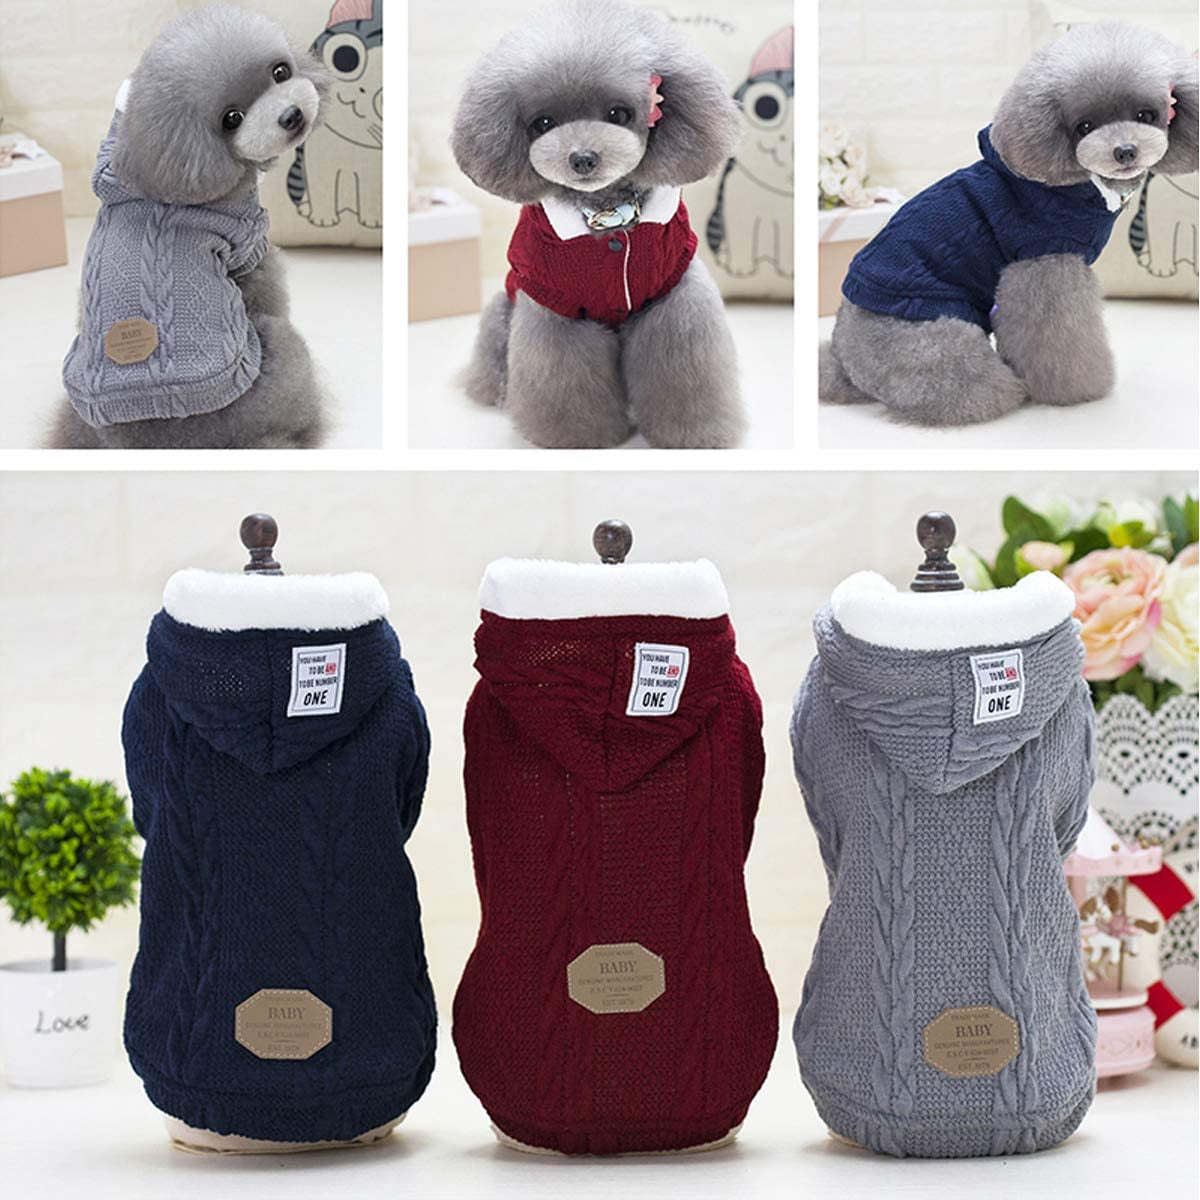 Dog Sweater, Bwealth 2 Layers Fleece Lined Warm Dog Clothes - Classic Knitted Winter Small Dog Jumper Coat - Pet Apparel Jacket Dog Sweaters for Small Dogs Cats Puppy Boy Girl (Medium, Dark Blue)